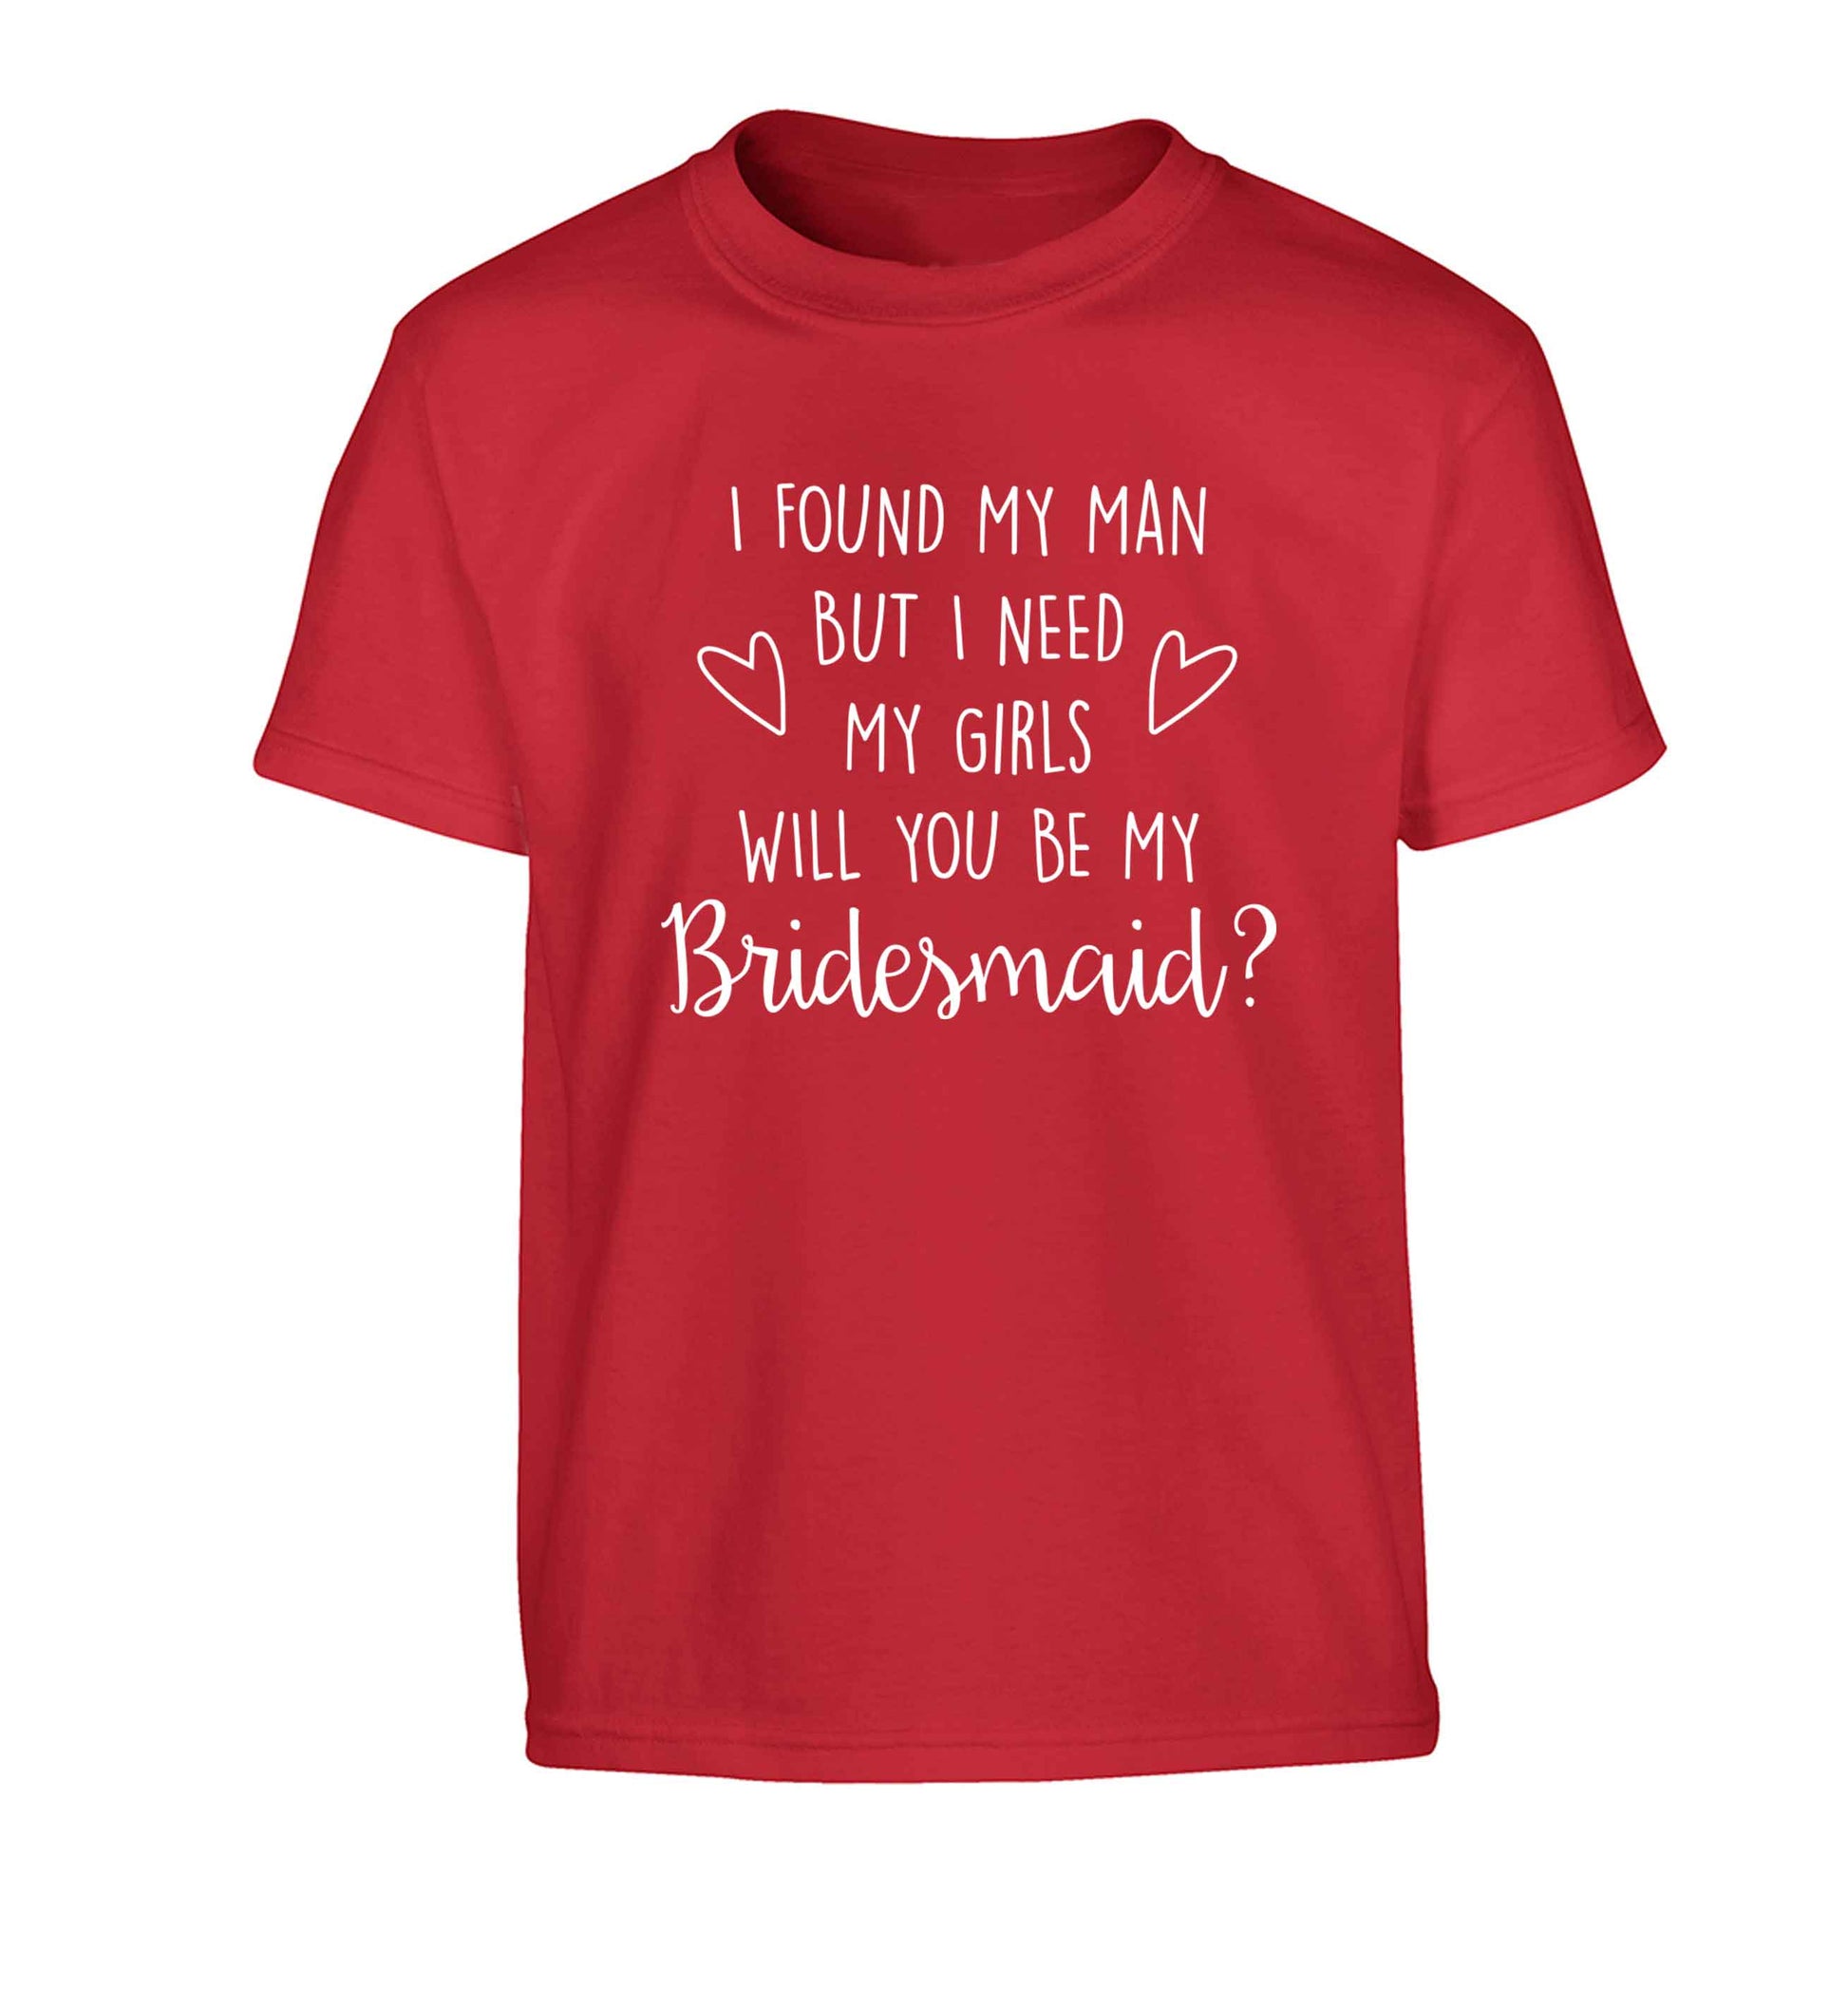 I found my man but I need my girls will you be my bridesmaid? Children's red Tshirt 12-13 Years